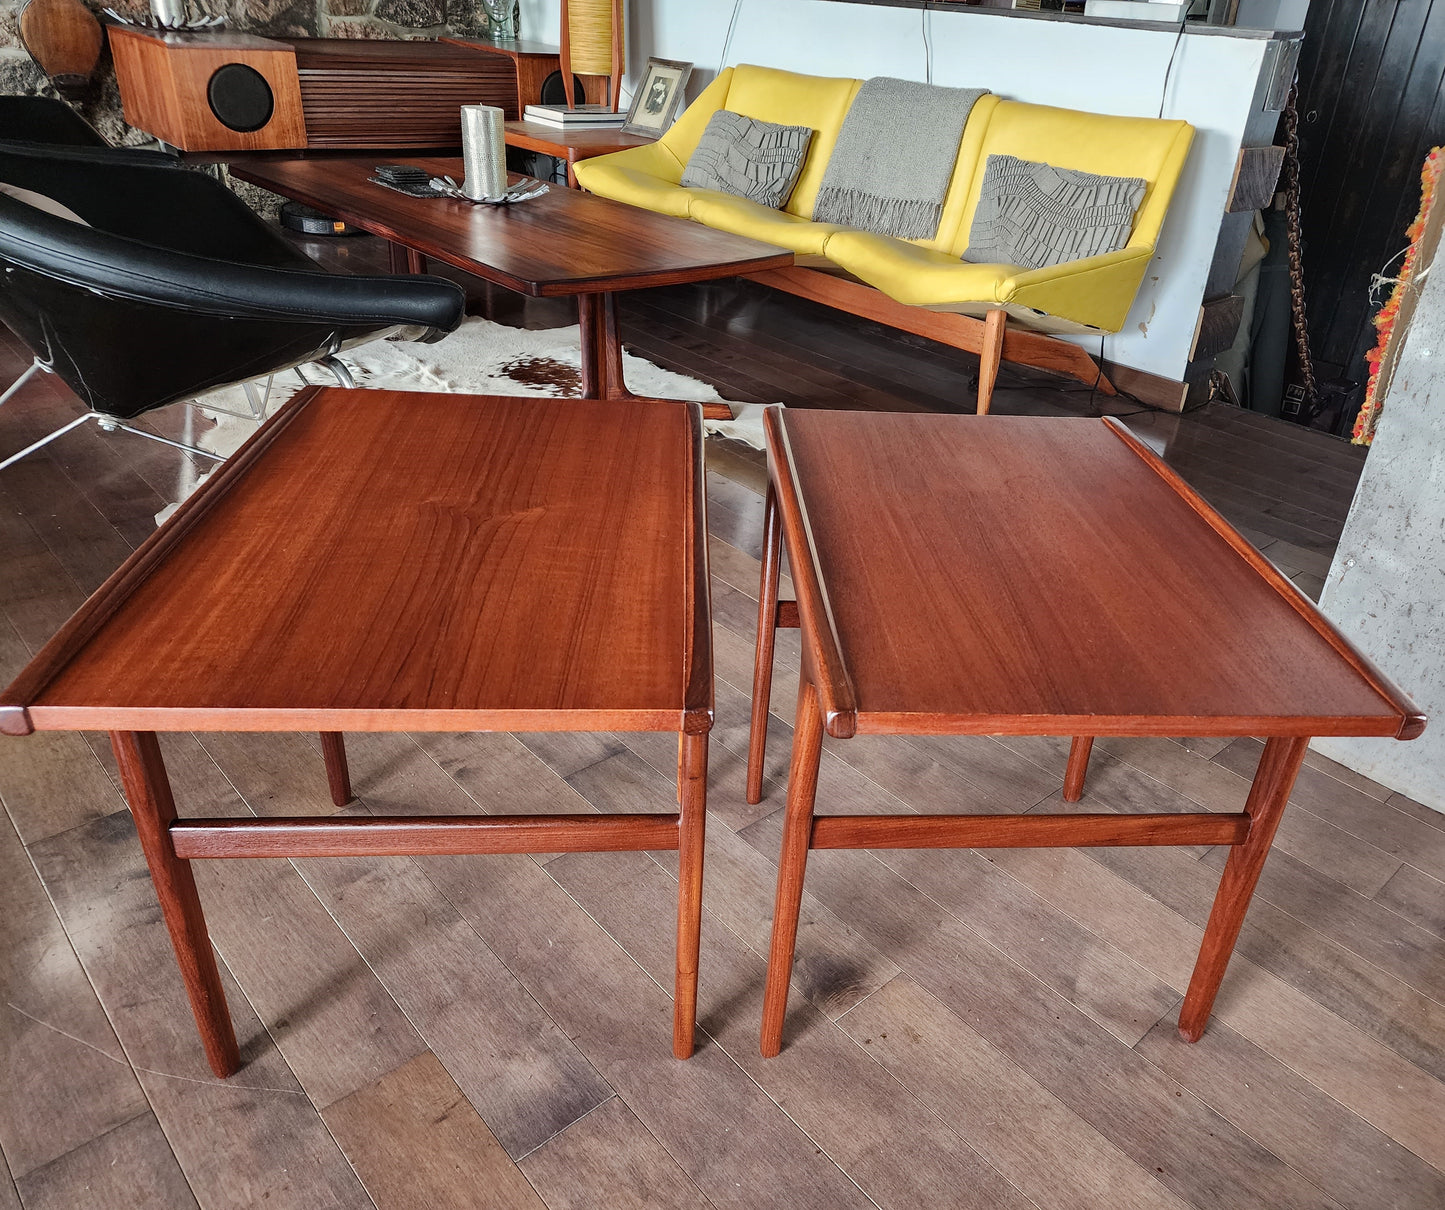 2 REFINISHED Mid Century Modern Teak Accent Tables